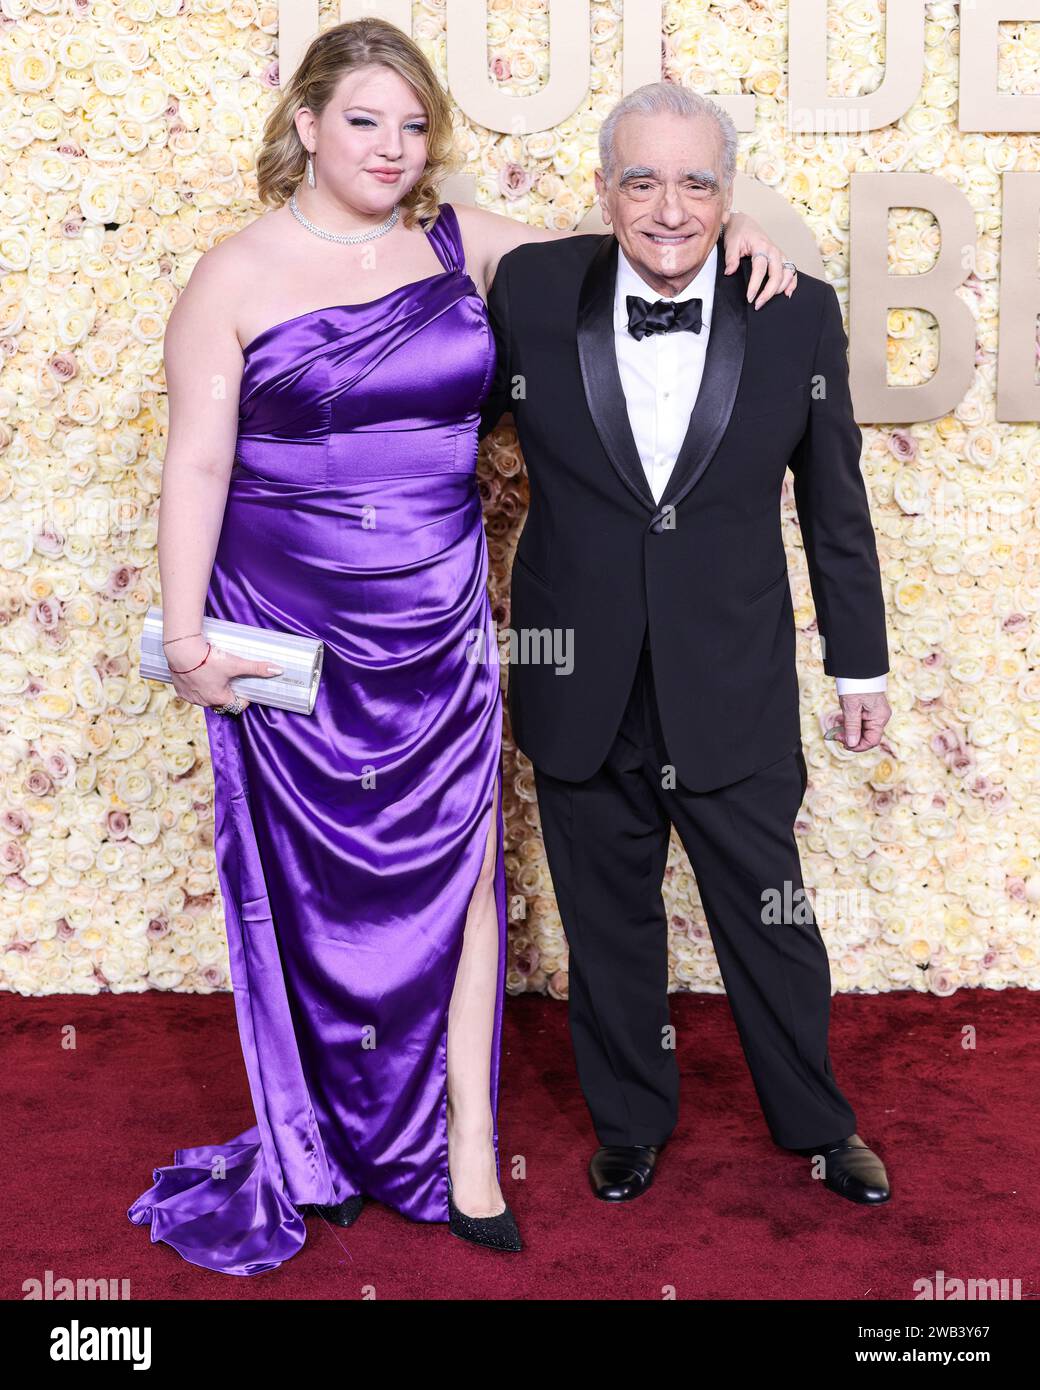 BEVERLY HILLS, LOS ANGELES, CALIFORNIA, USA - JANUARY 07: Francesca Scorsese and father Martin Scorsese arrive at the 81st Annual Golden Globe Awards held at The Beverly Hilton Hotel on January 7, 2024 in Beverly Hills, Los Angeles, California, United States. (Photo by Xavier Collin/Image Press Agency) Stock Photo